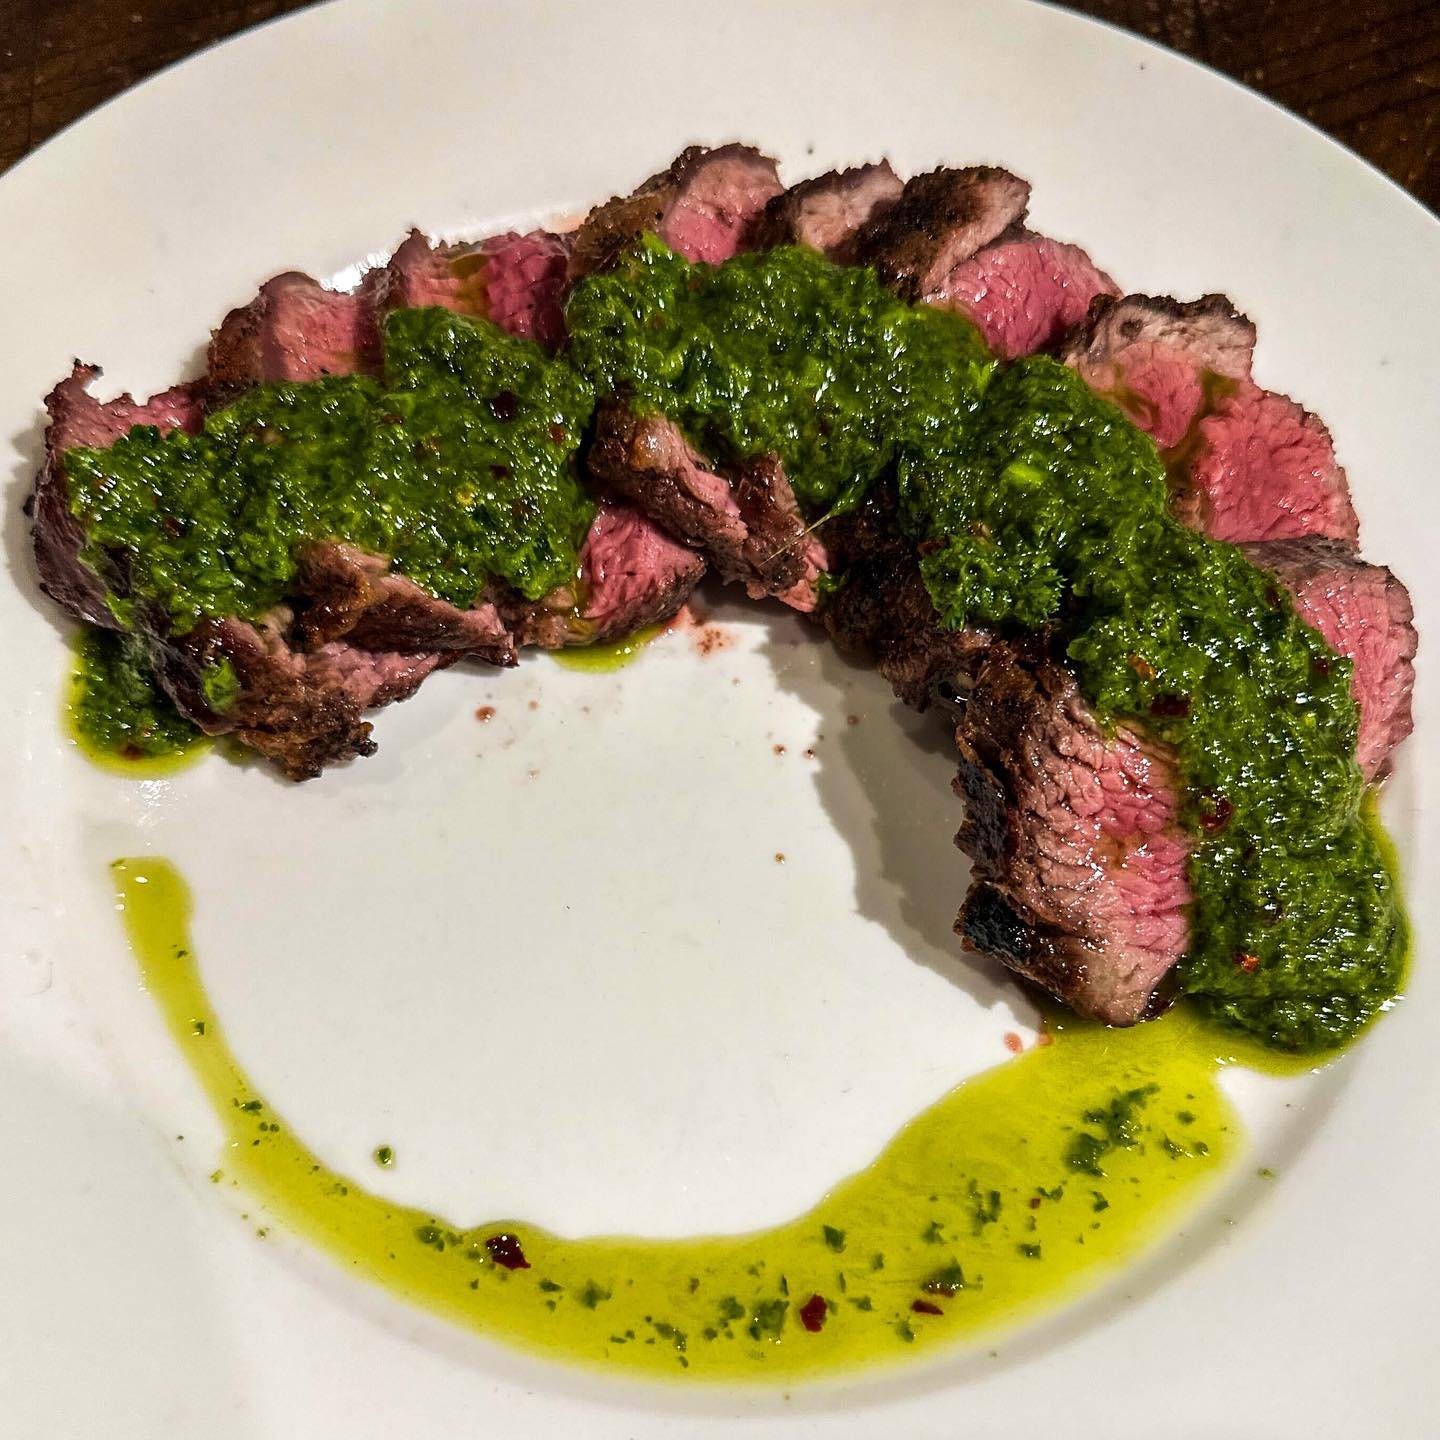 Impress your guests with exciting, flavorful dishes! Our tri-tip with freshly prepared chimichurri is the perfect choice. 
.
.
.
.
#steak #tritip #chimichurri #steakdinner #wedding #weddingcatering #weddingcaterer #weddingfood #party #bigday #caterin